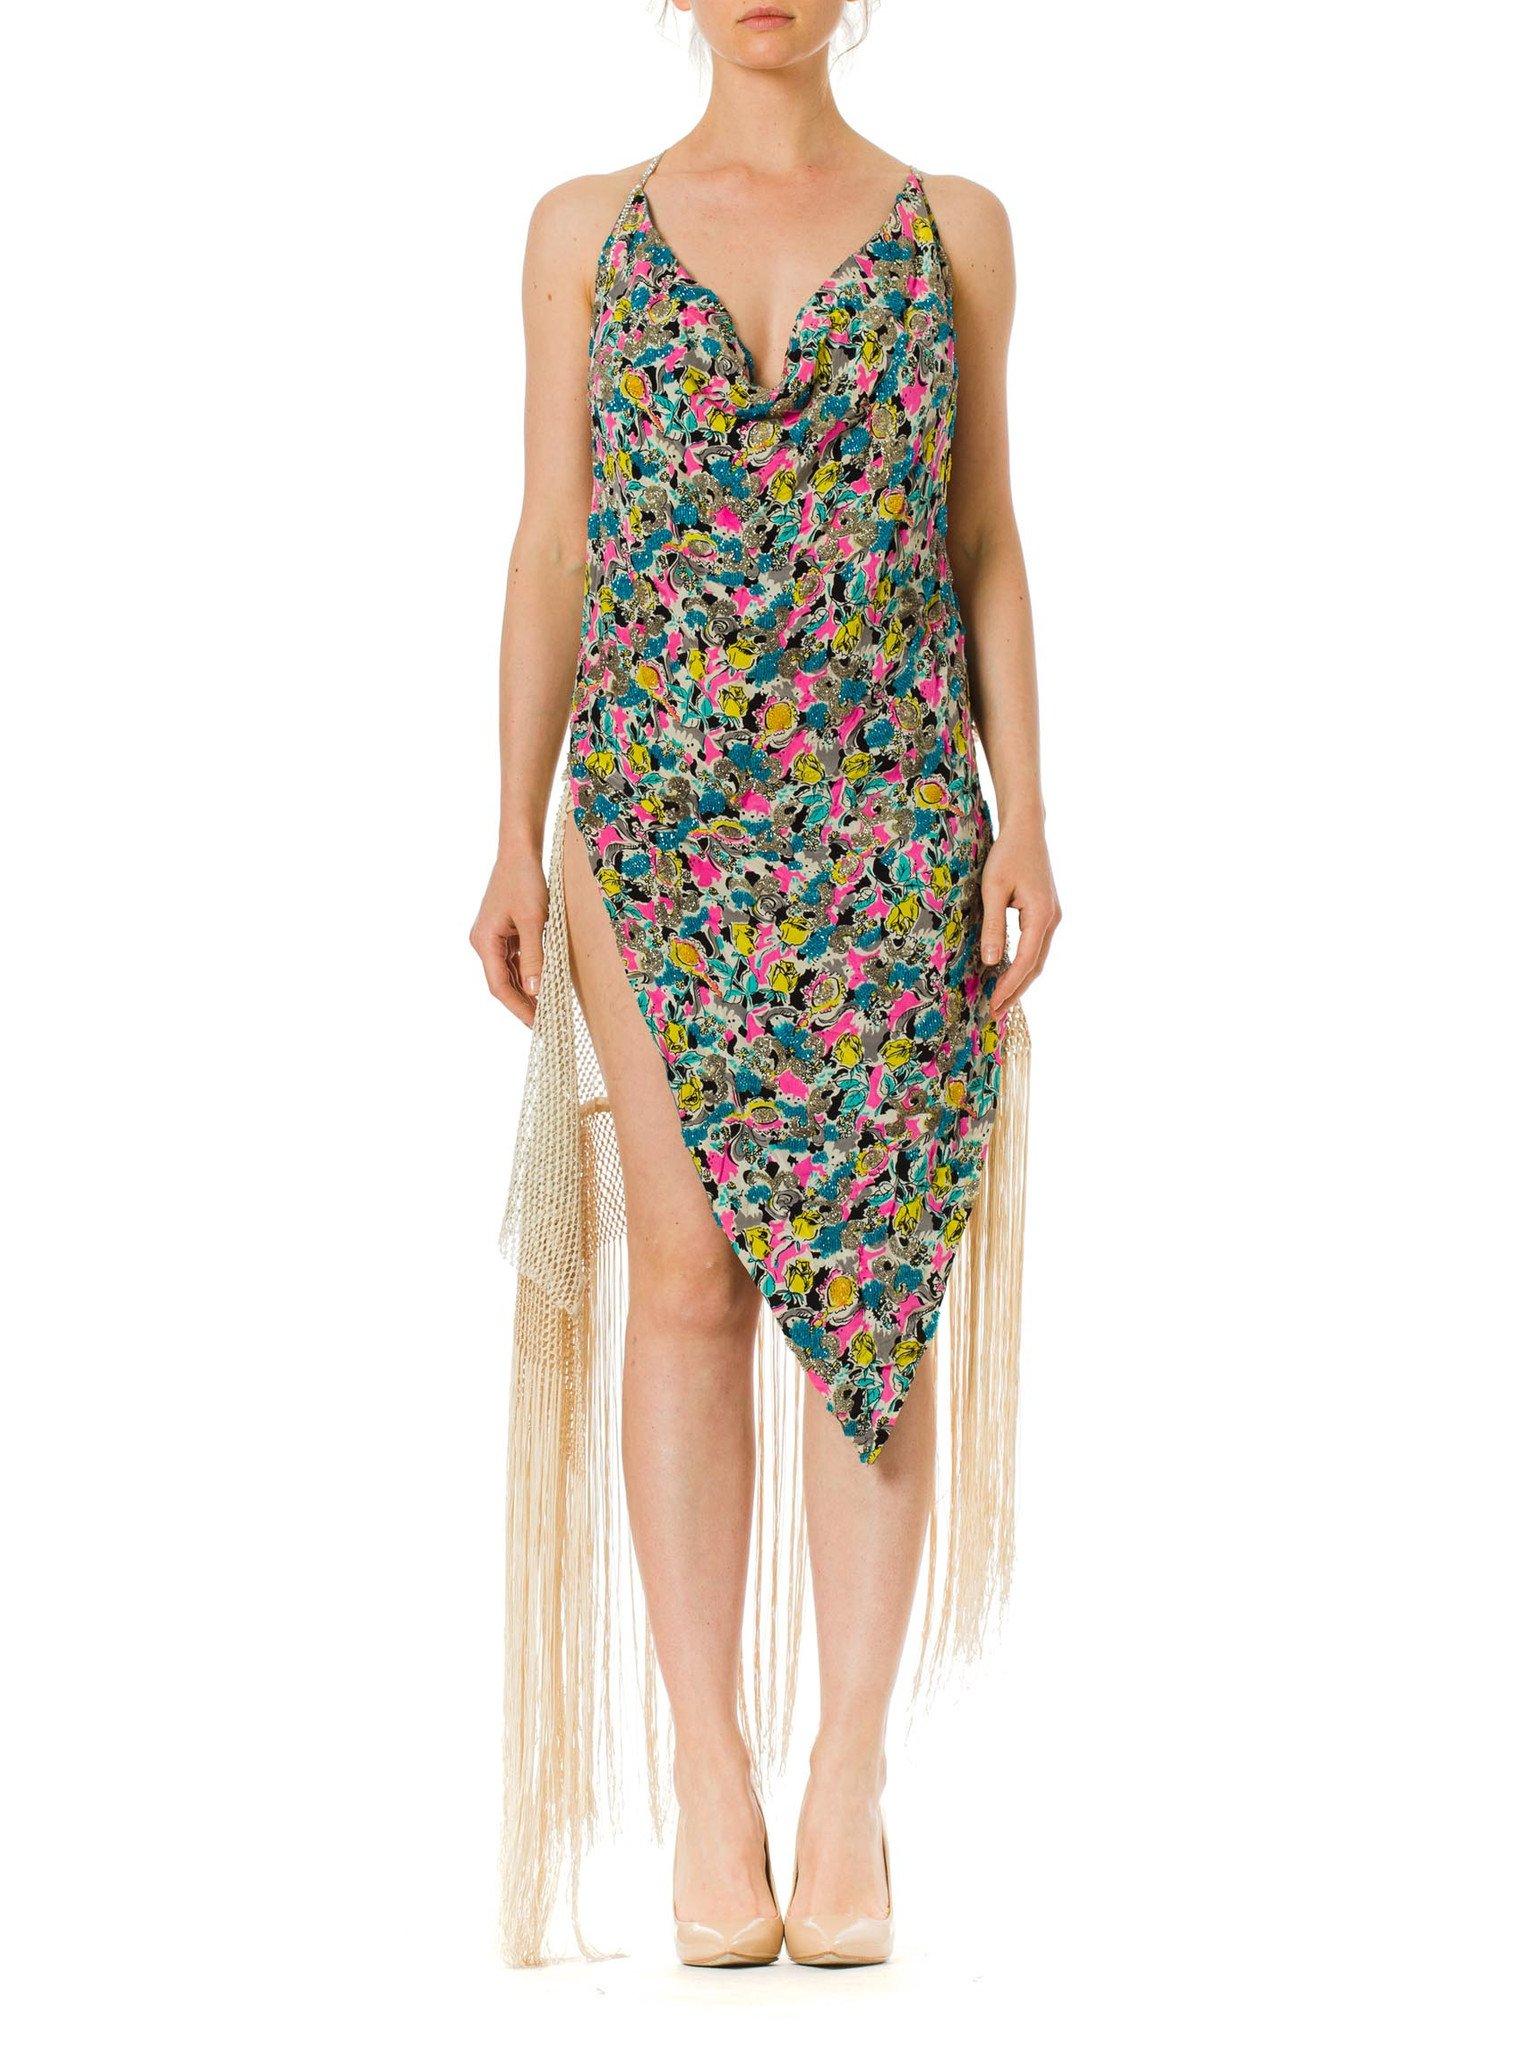 MORPHEW COLLECTION Floral Printed Cocktail Dress Made Of 1940S Beaded Silk And 1930S Fringed Mesh